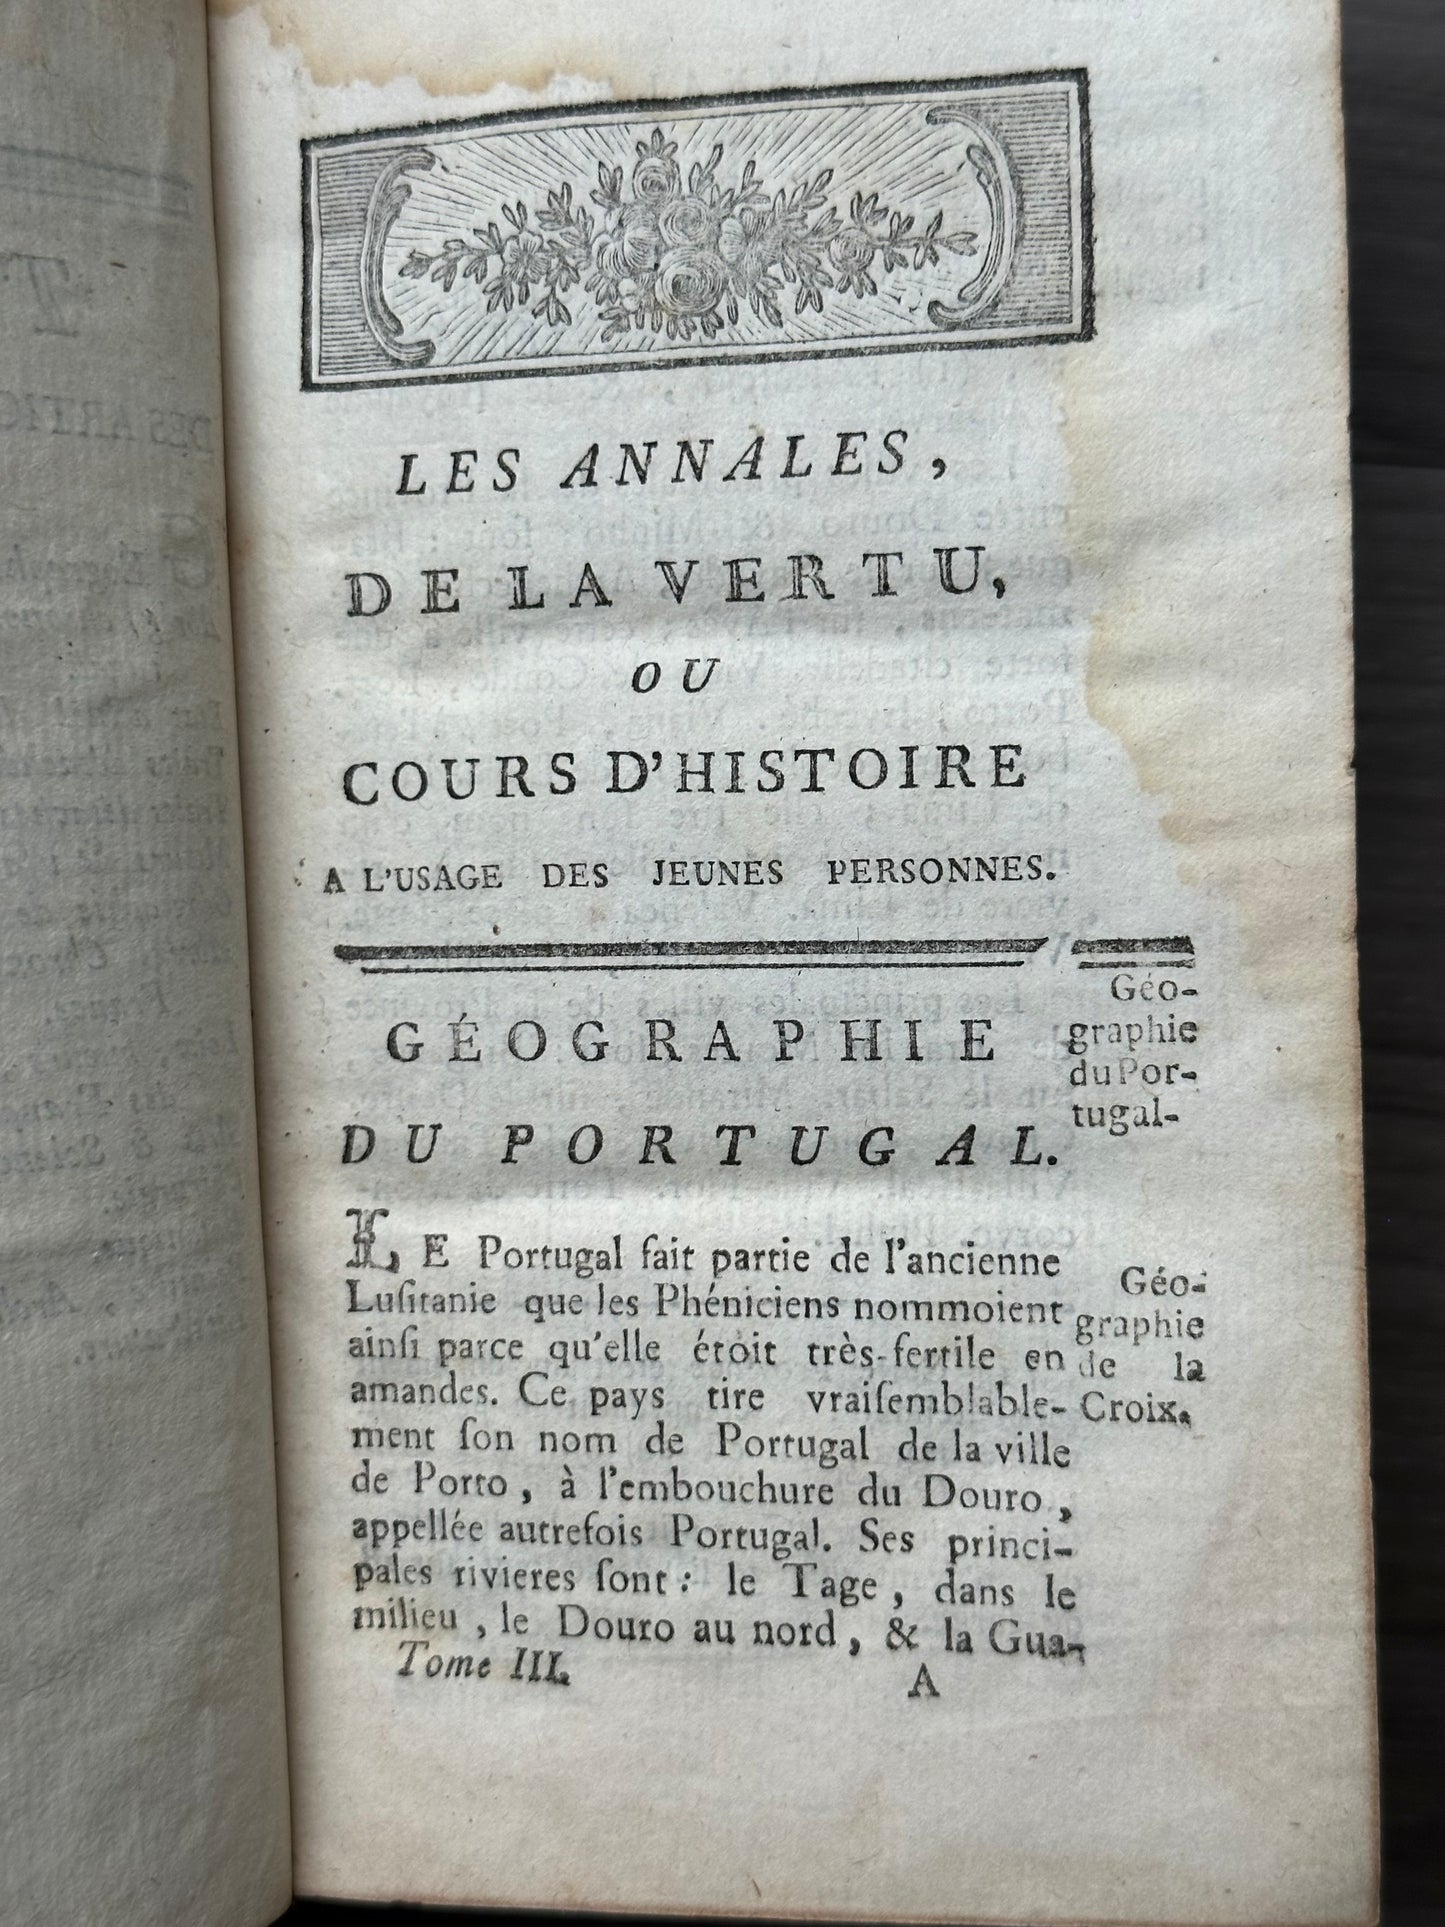 1787 History Lessons for Young People